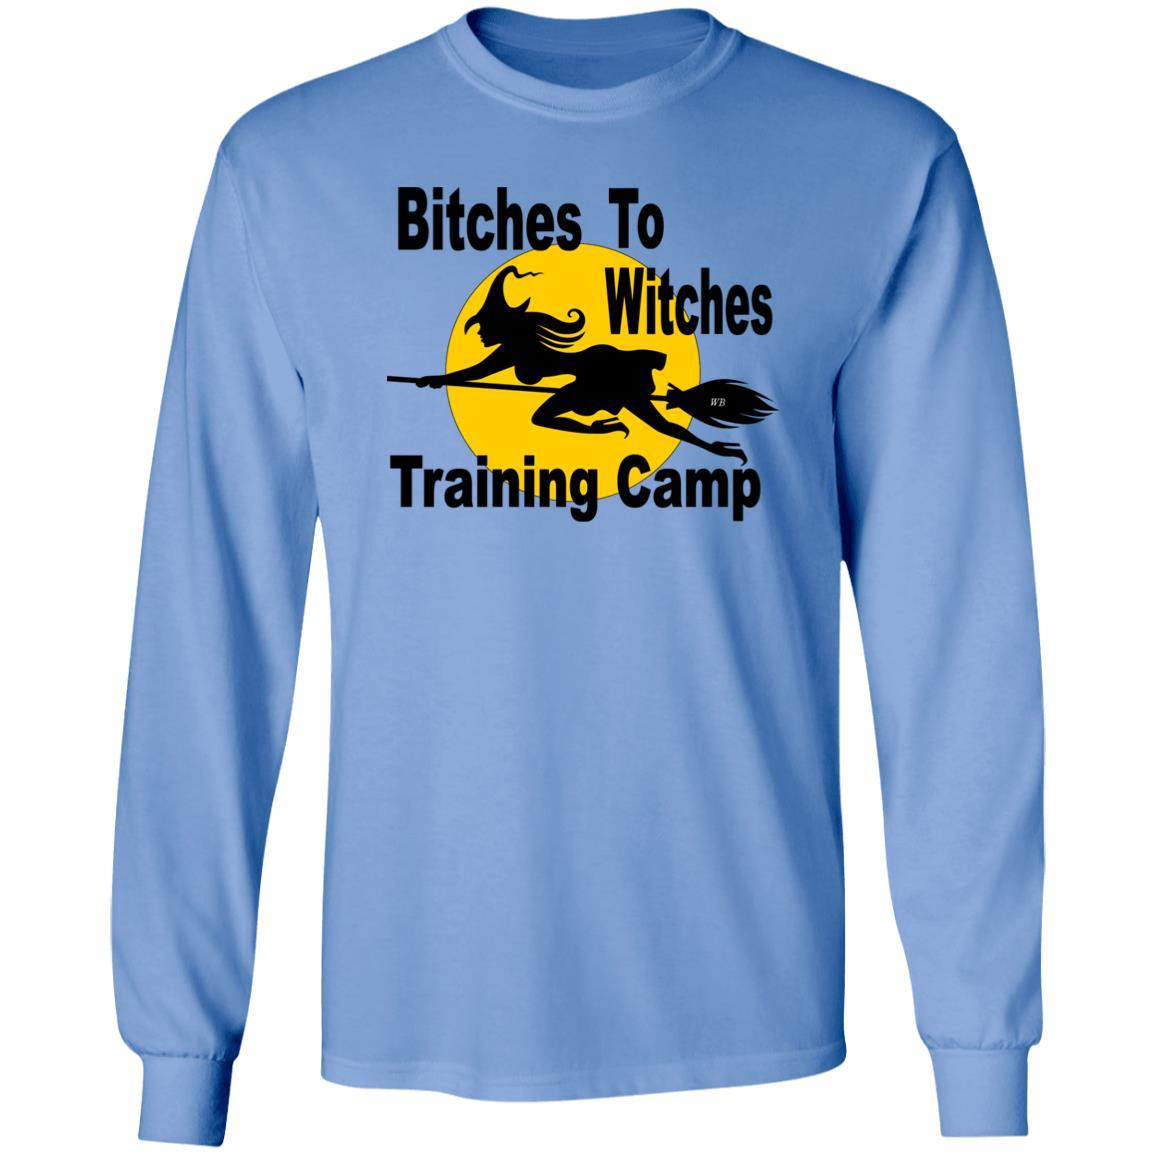 T-Shirts Carolina Blue / S WineyBitches.Co "Bitches To Witches Training Camp" LS Ultra Cotton T-Shirt WineyBitchesCo